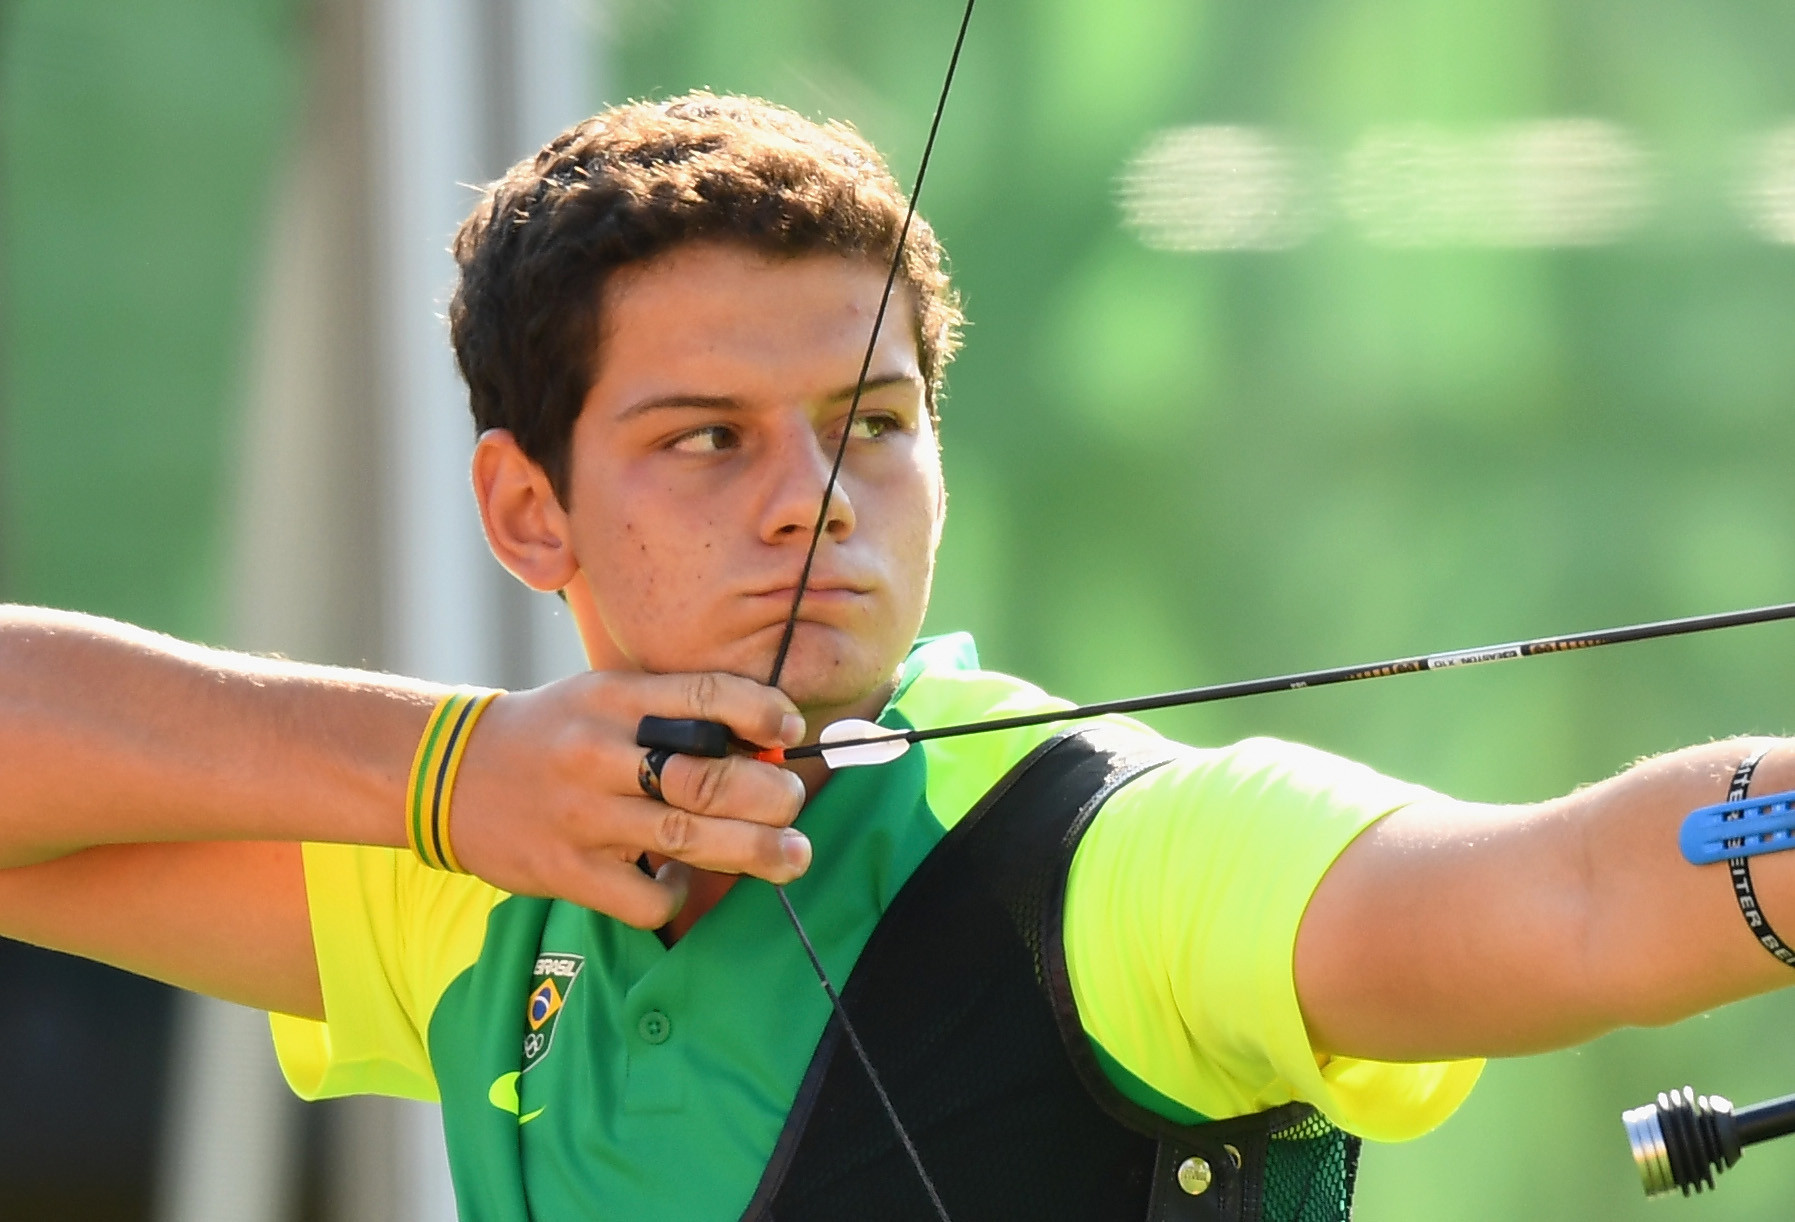 Marcus D'Almeida of Brazil topped men's recurve qualifying at the Pan American Archery Championships ©Getty Images